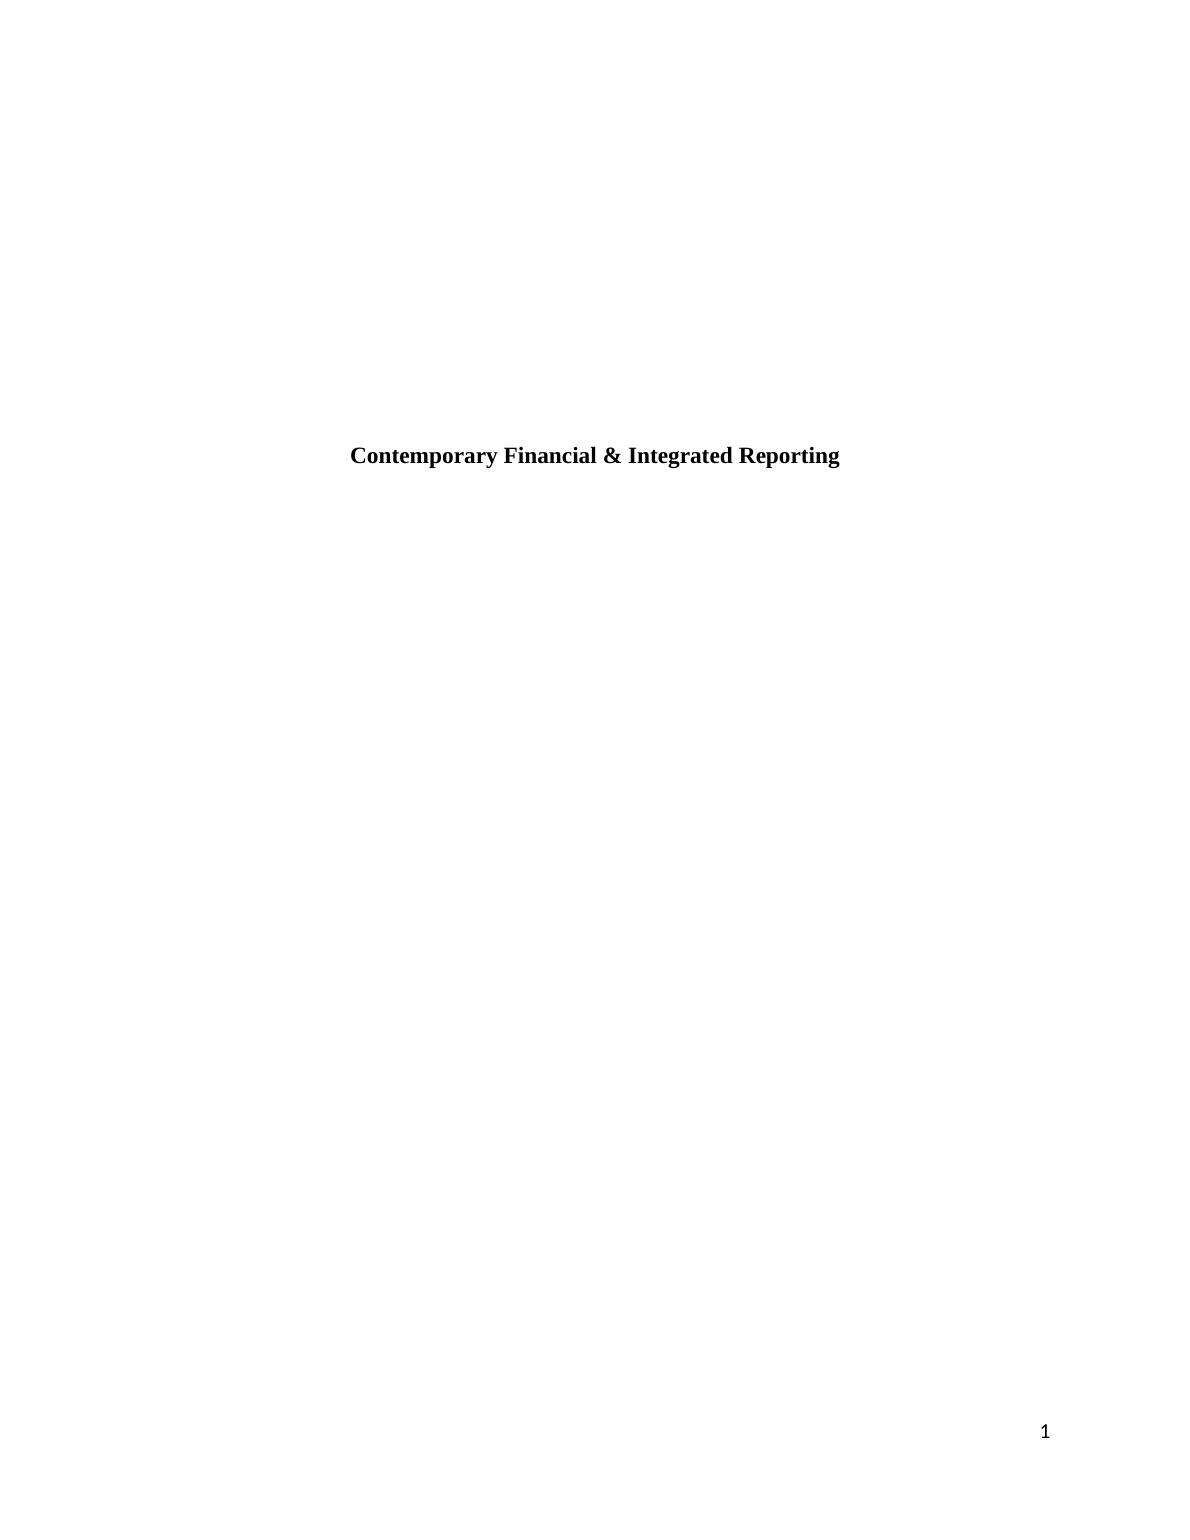 Contemporary Financial & Integrated Reporting_1